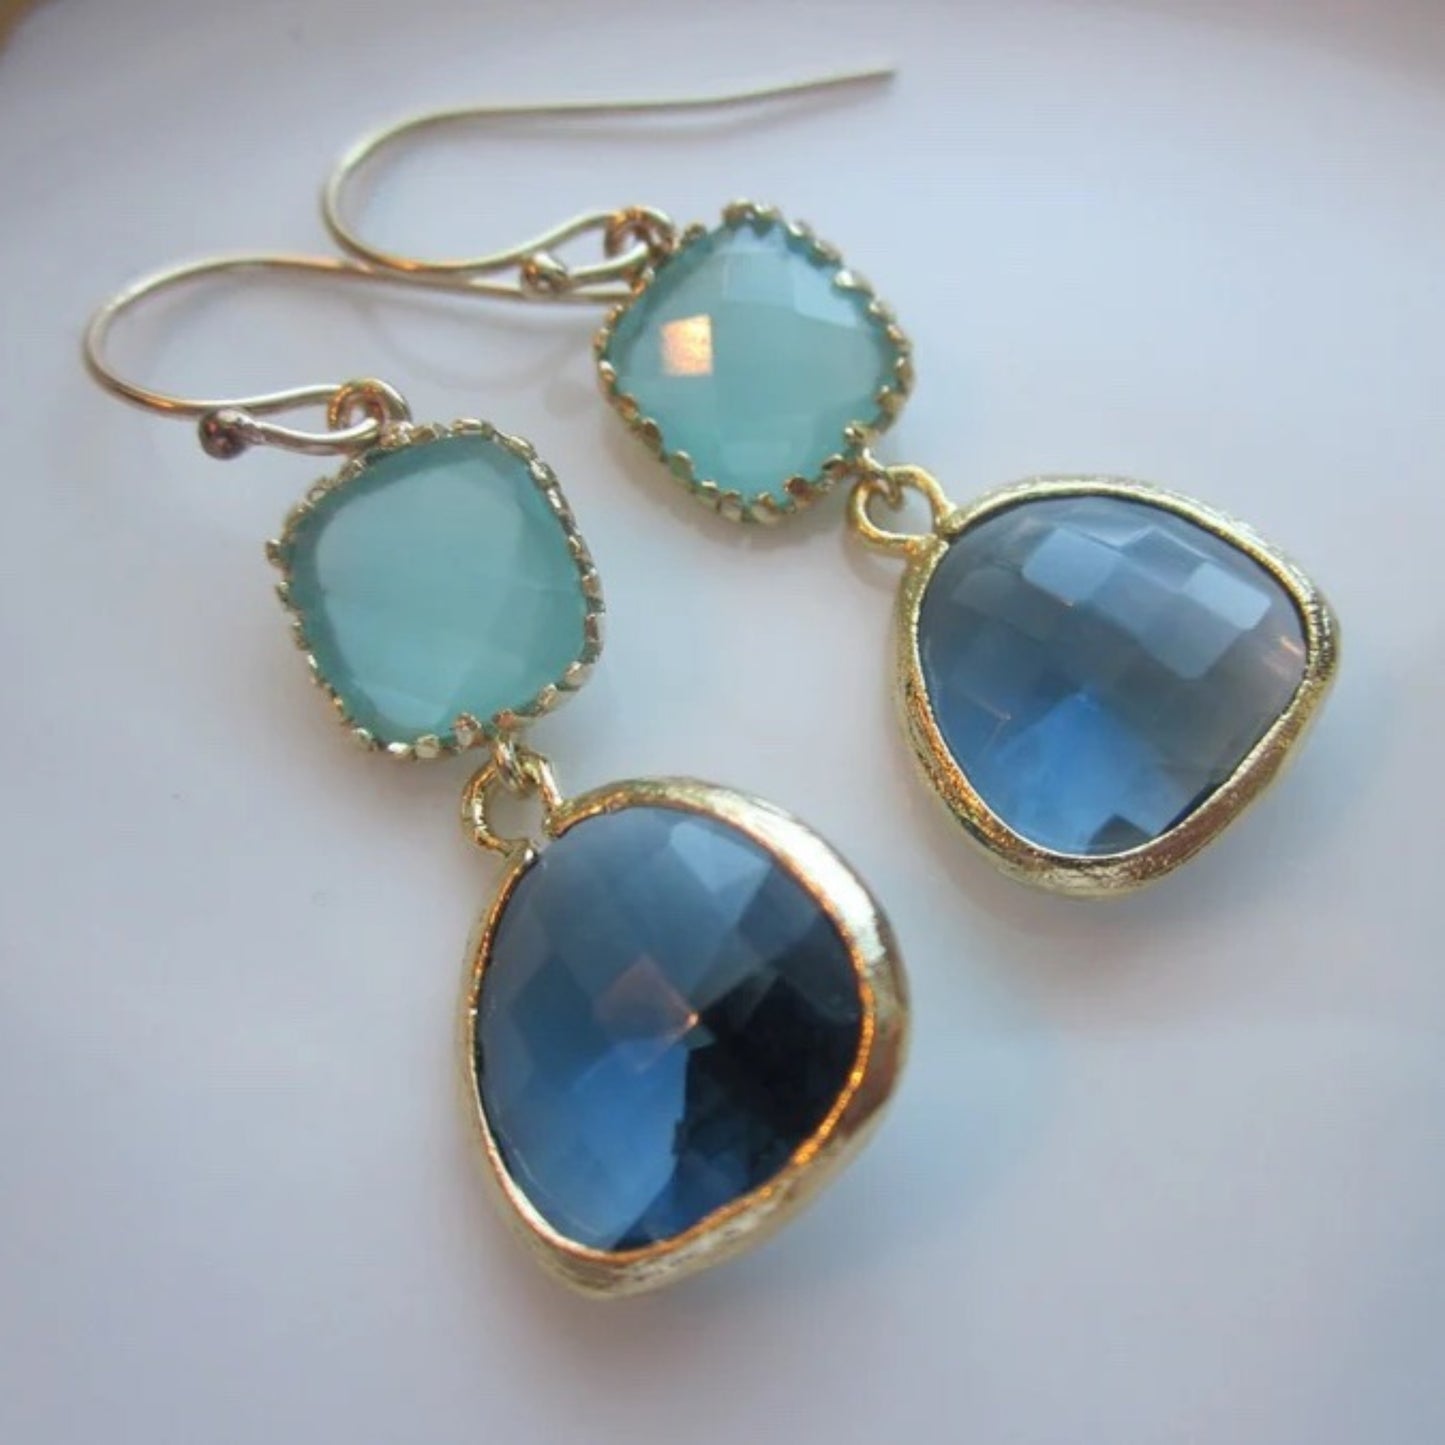 Laalee Jewelry Aqua Blue and Sapphire Gold Two Tier Earrings